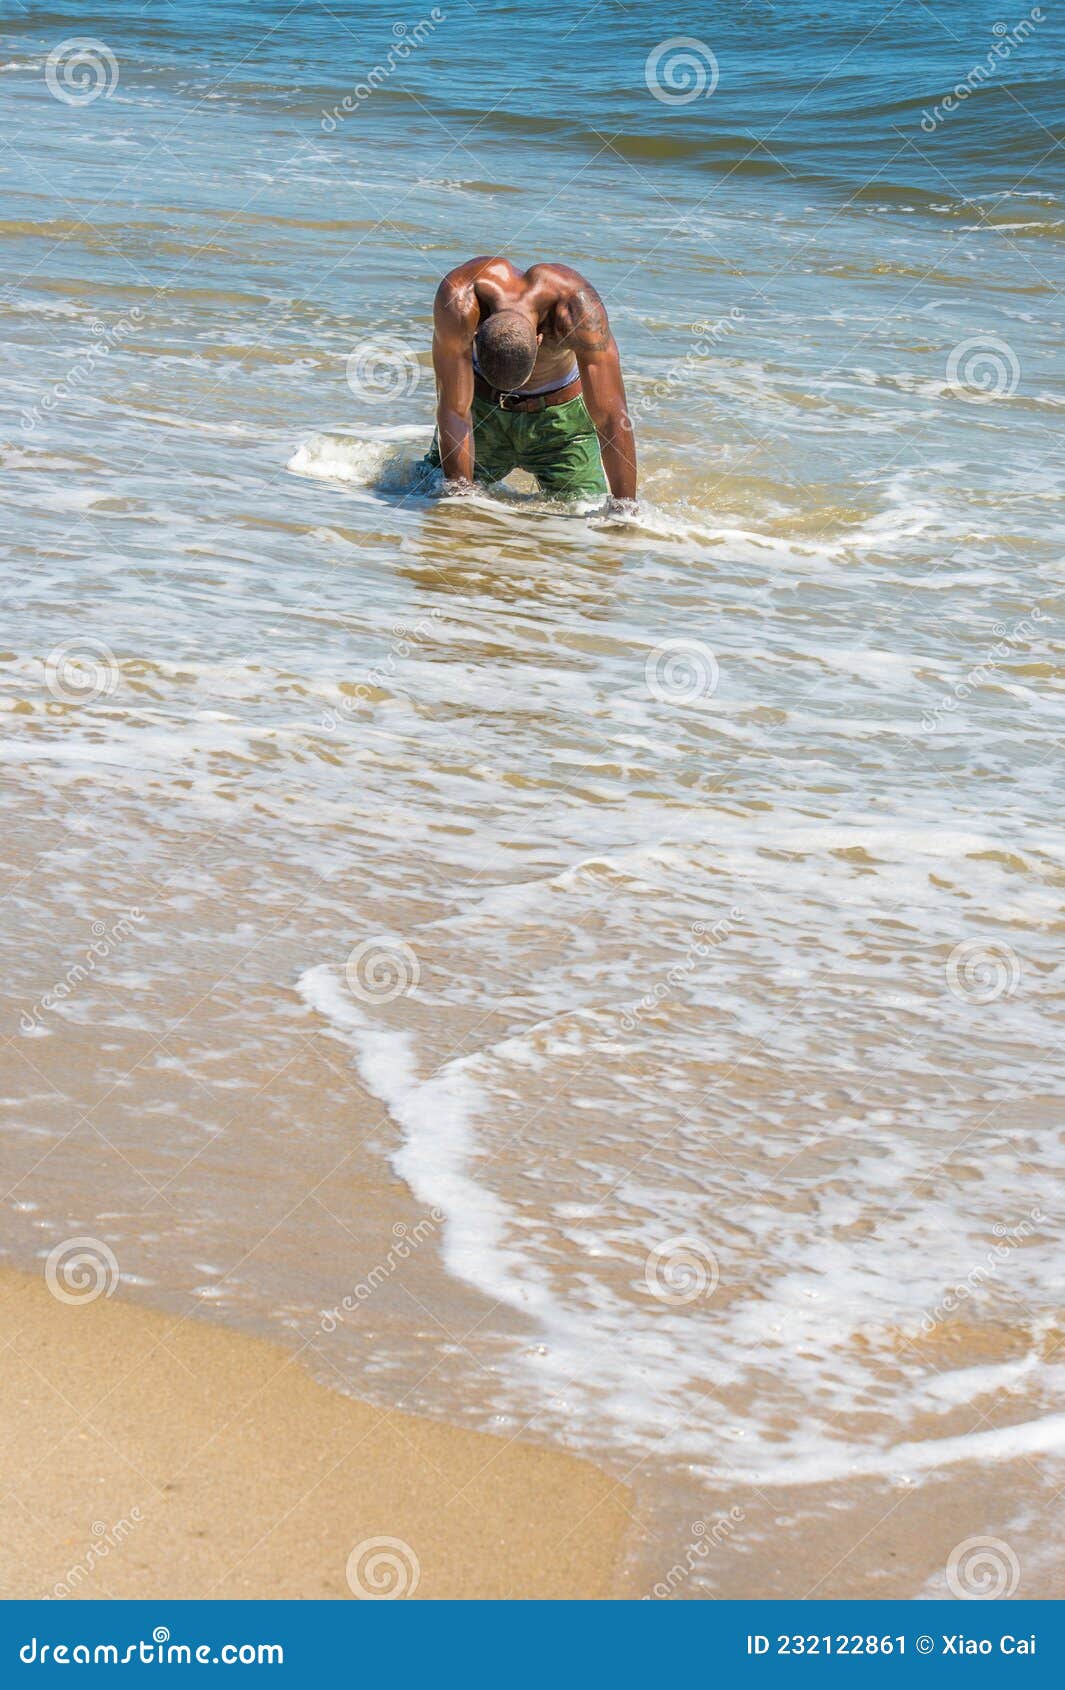 Young Black Man, Shirtless, Keeling Down on Water of Beach, Lowing His Head  Stock Image - Image of muscular, shore: 232122861